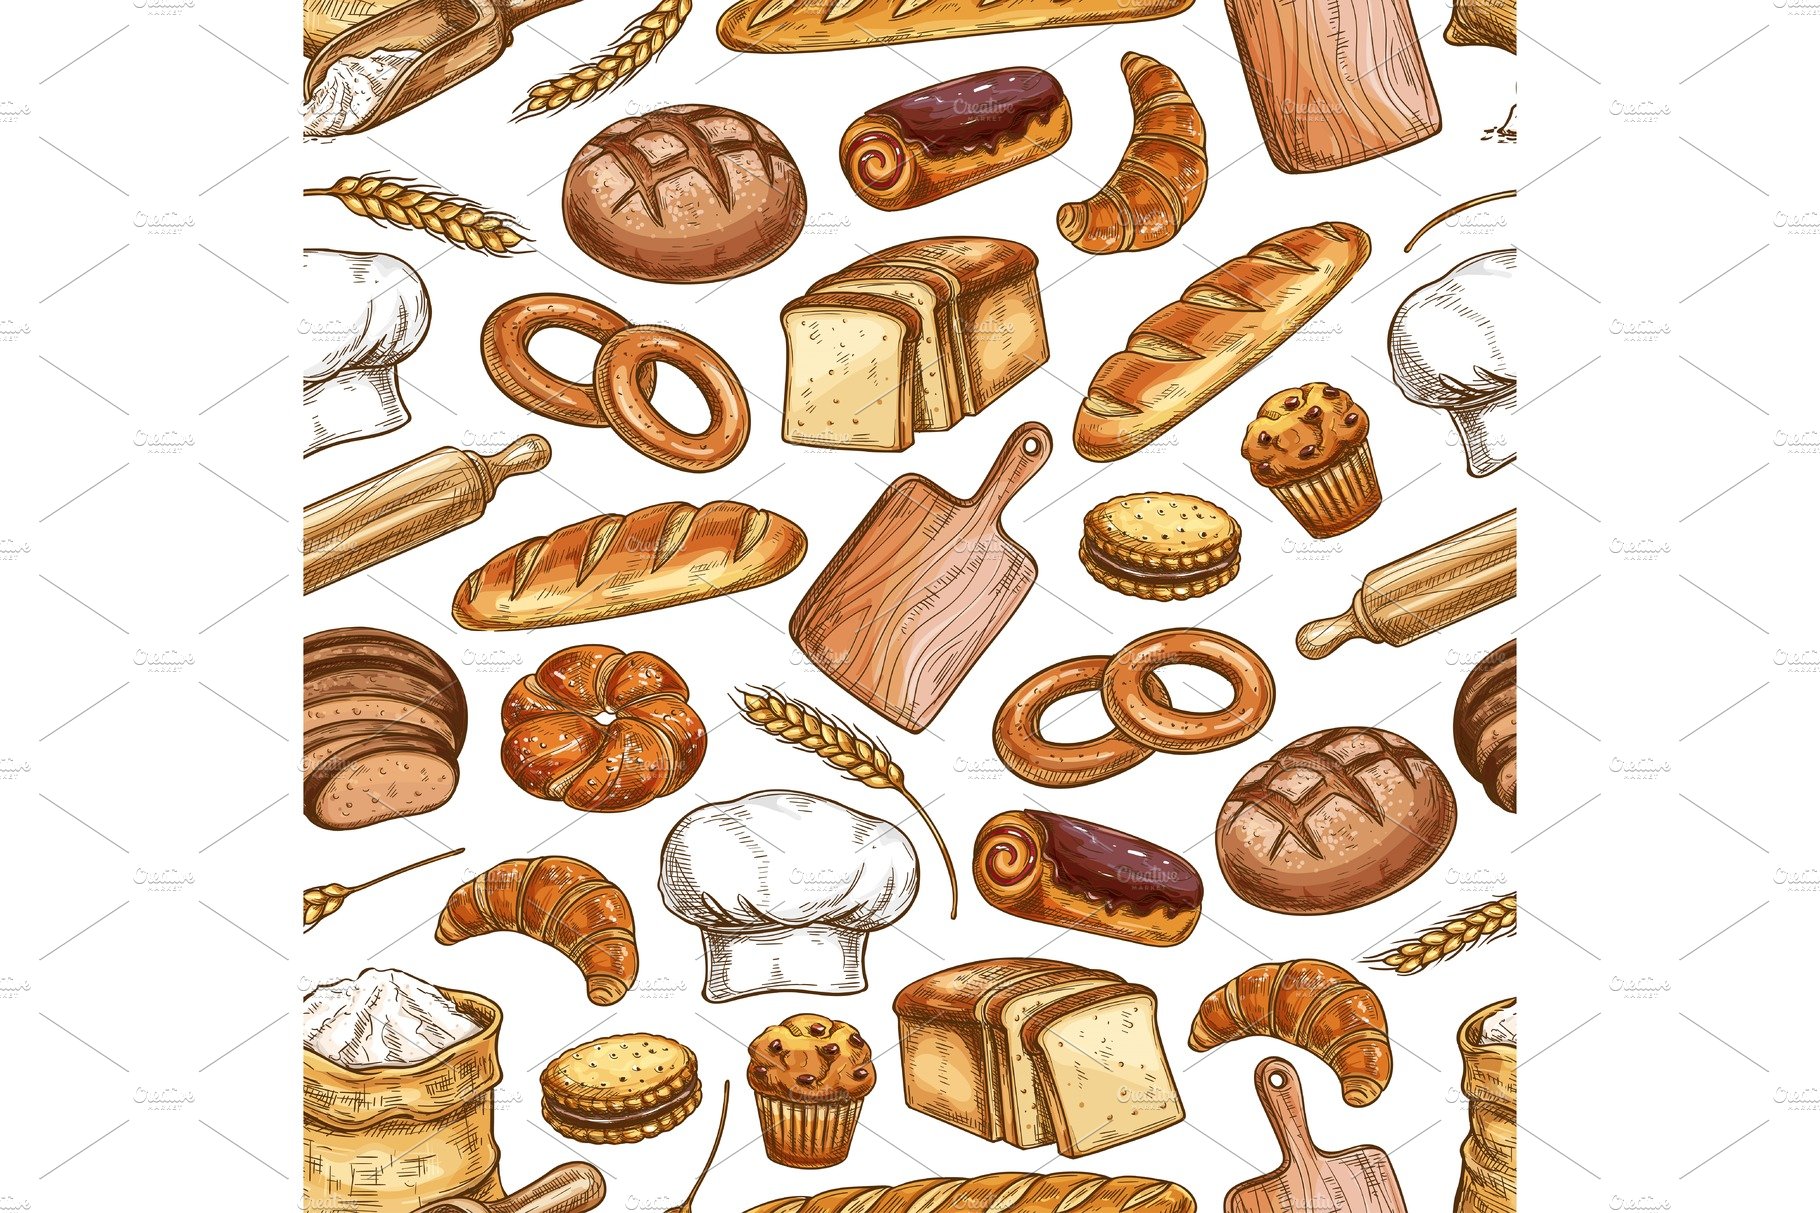 Bread and pastry food pattern cover image.